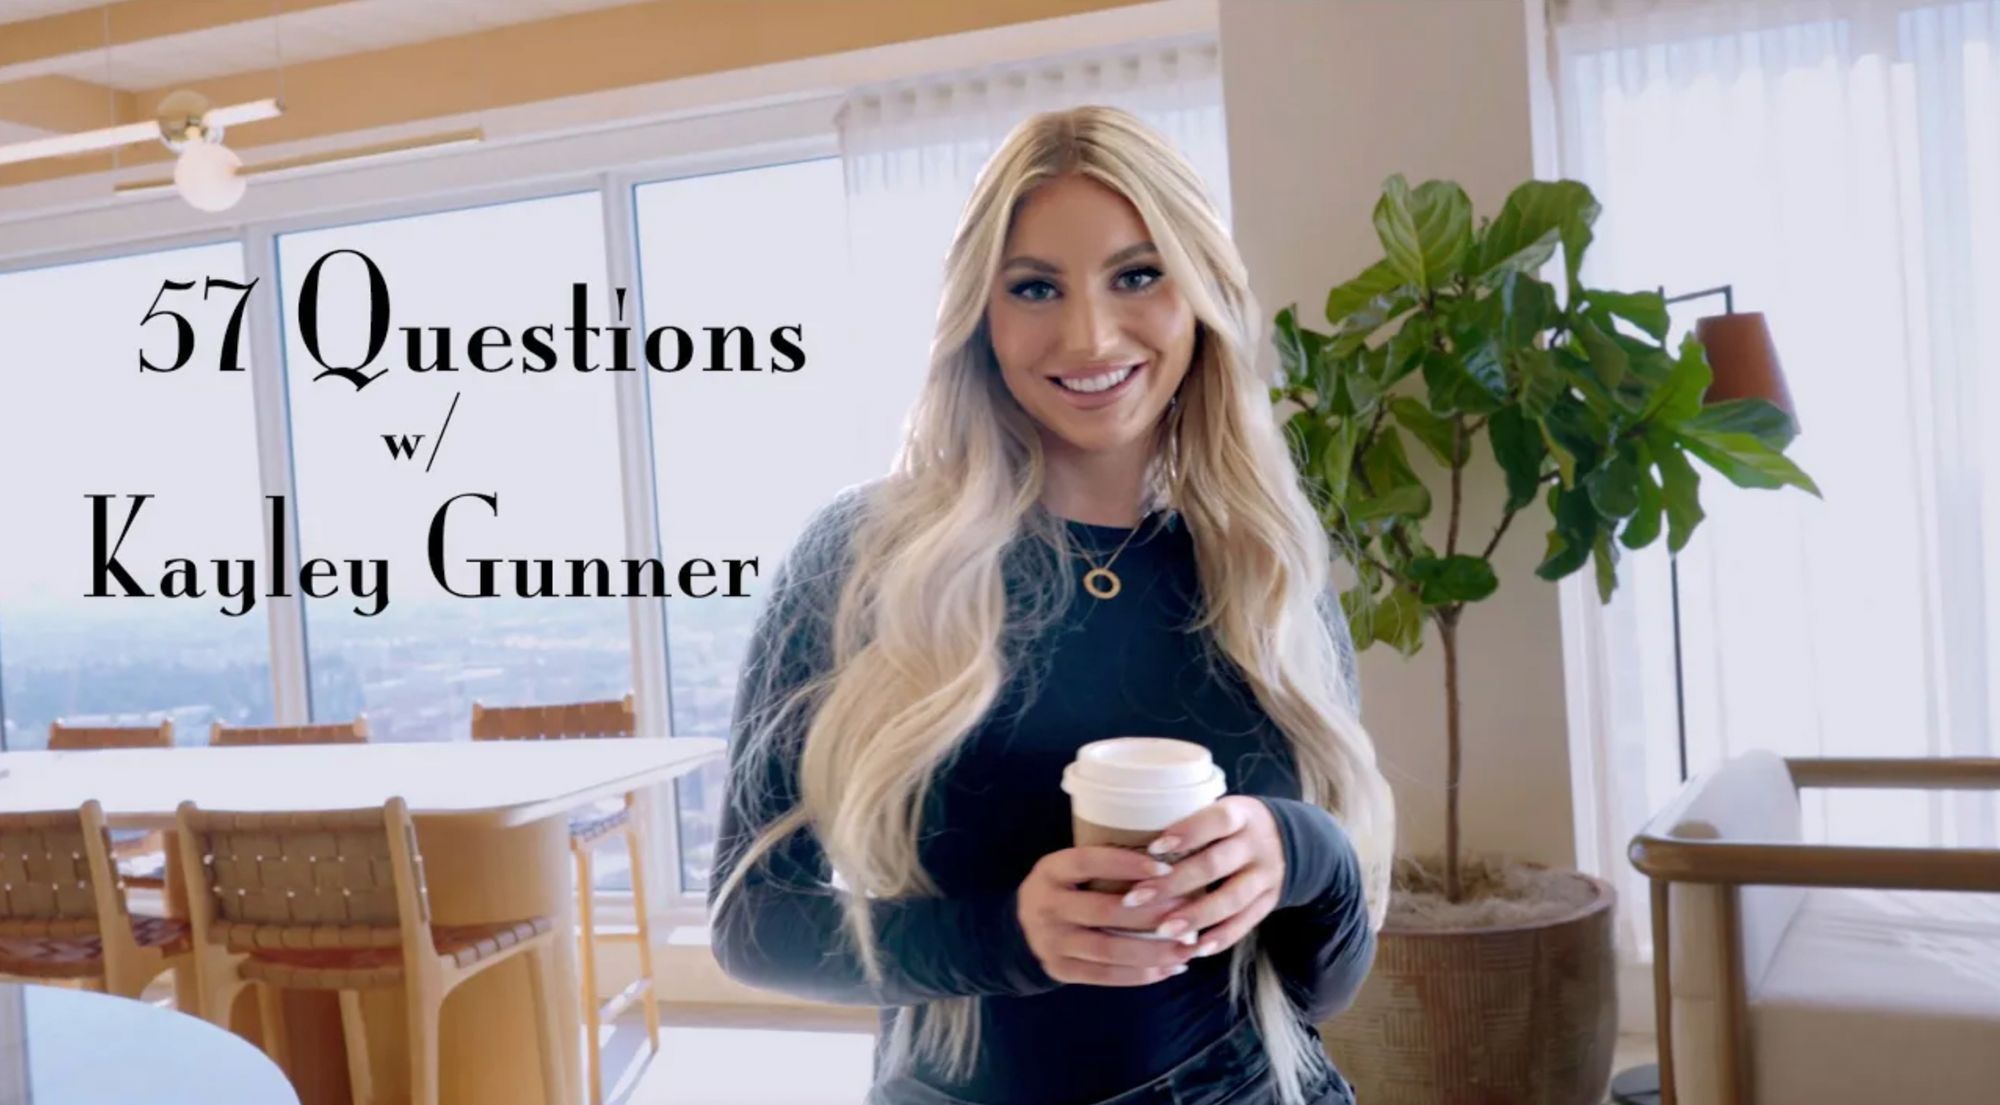 57 Questions With Kayley Gunner